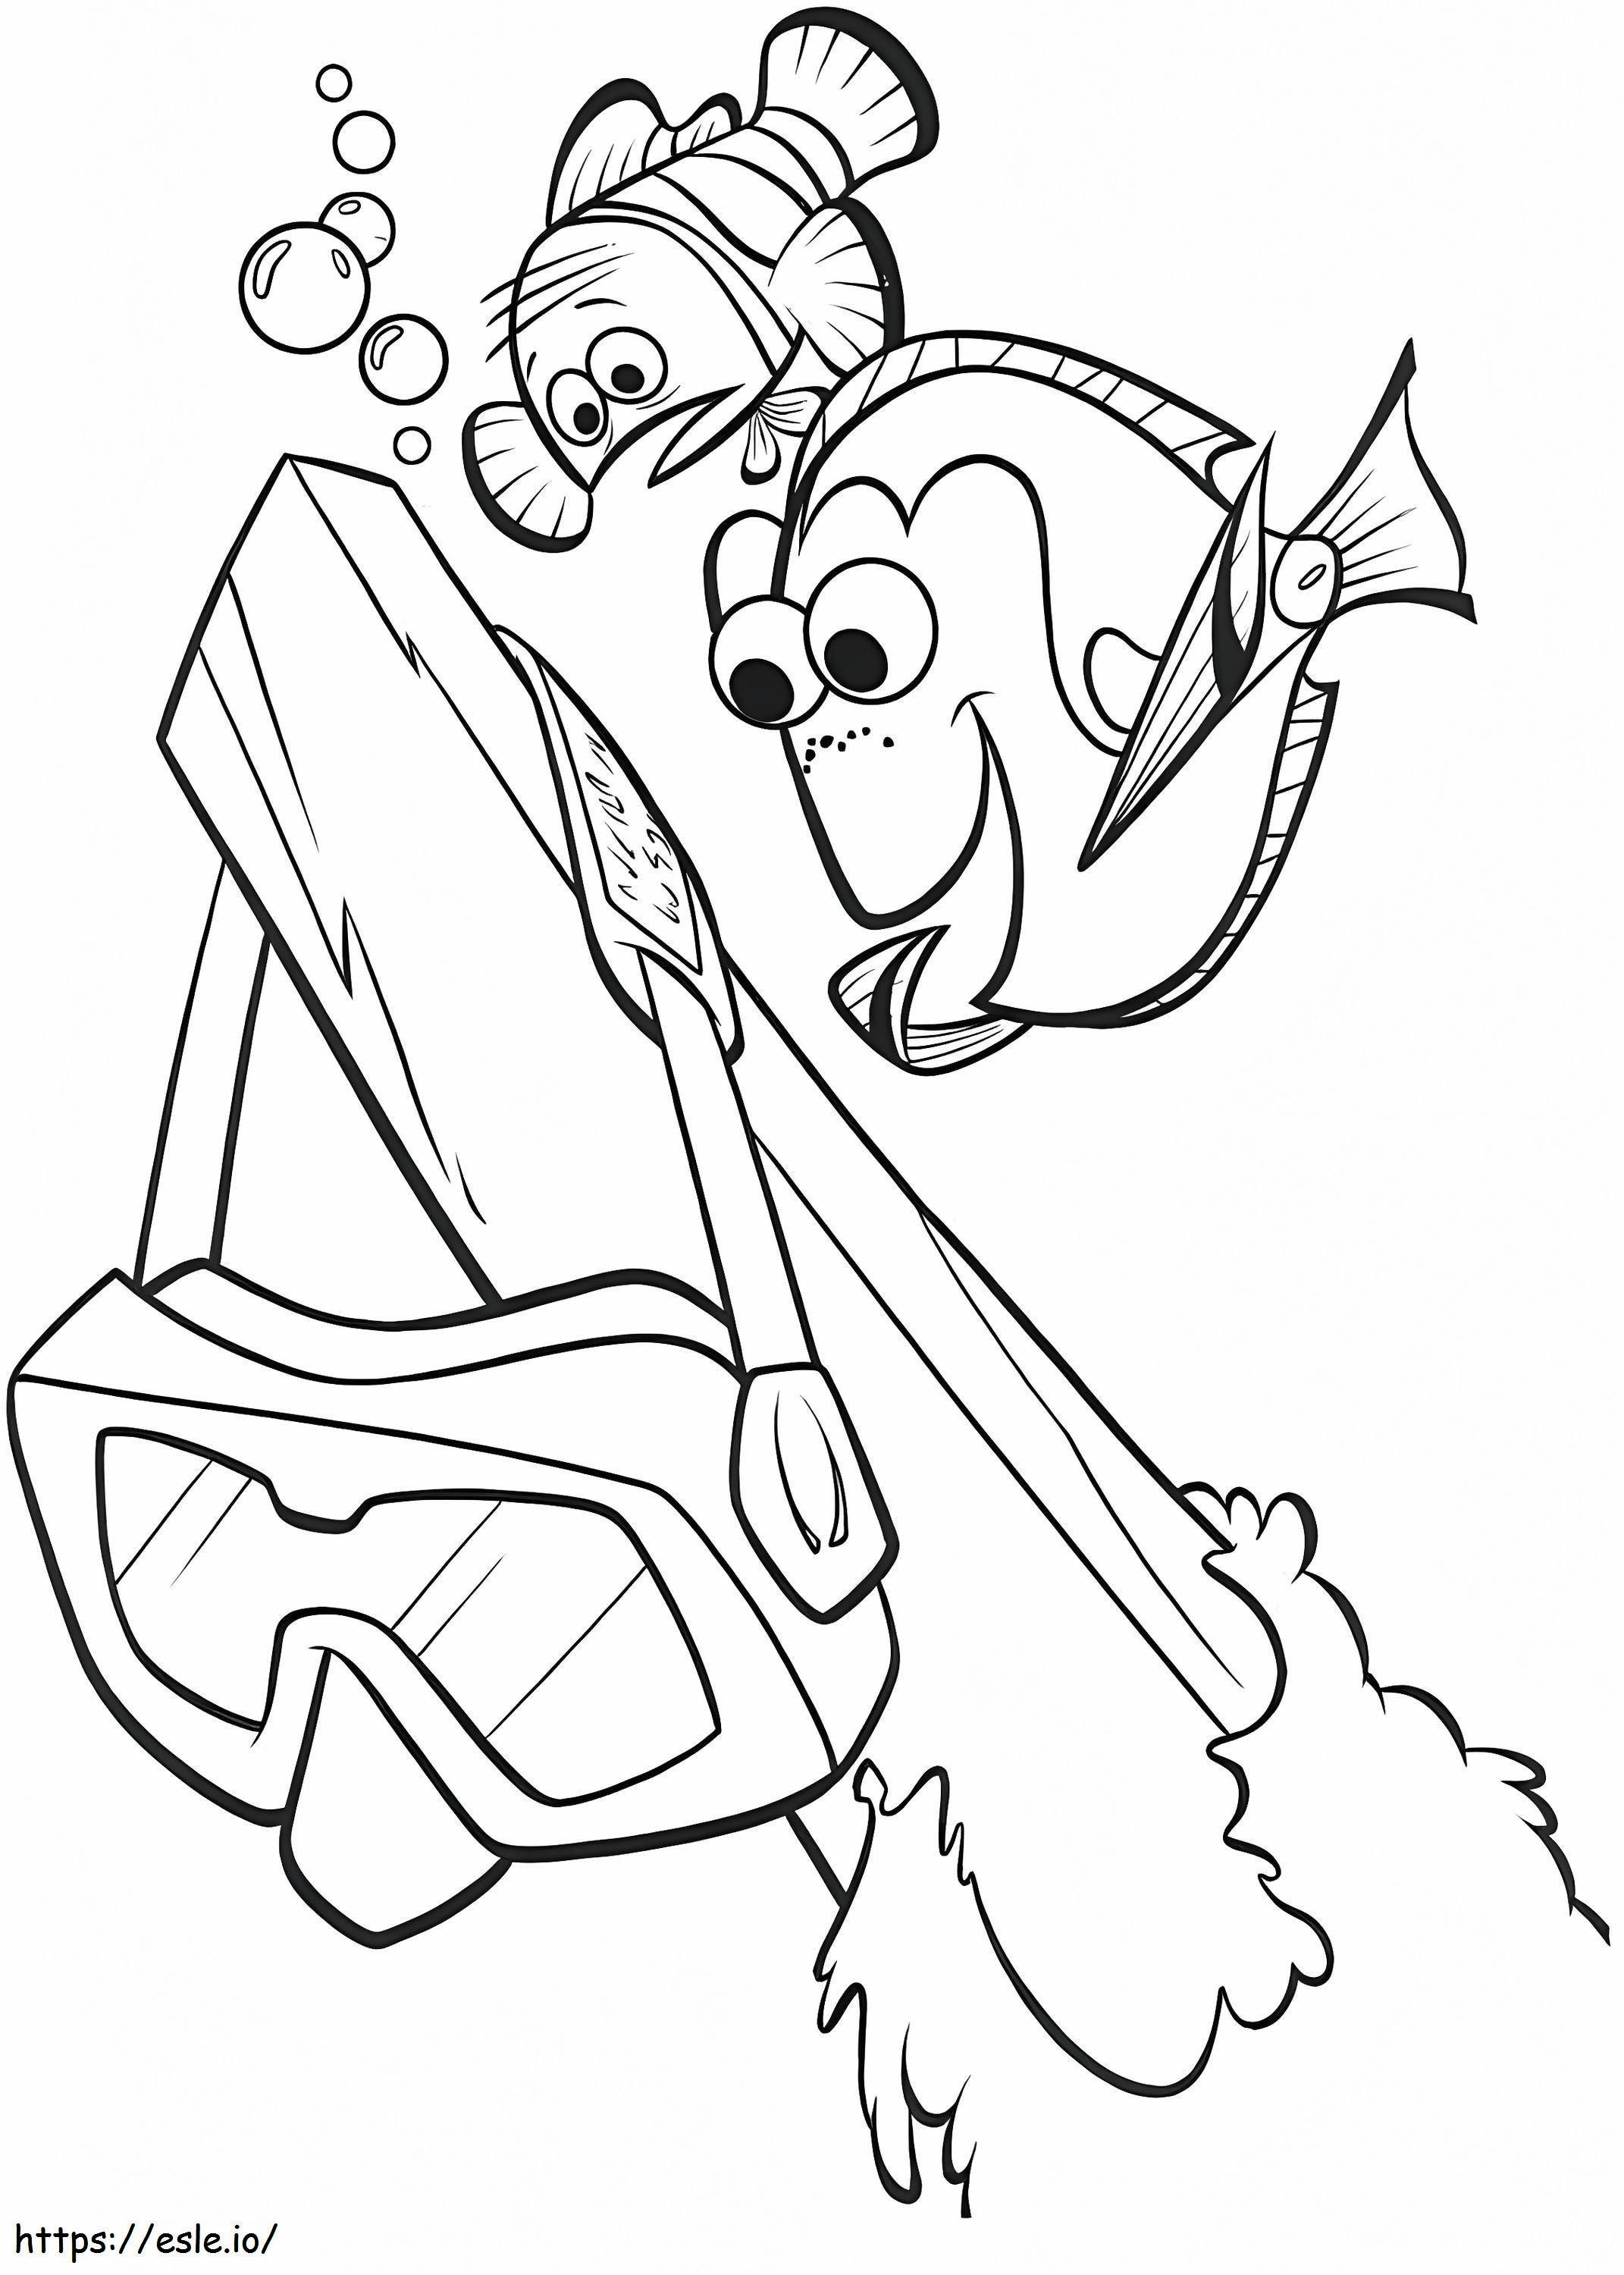 1535533161 Dory Reading A4 coloring page